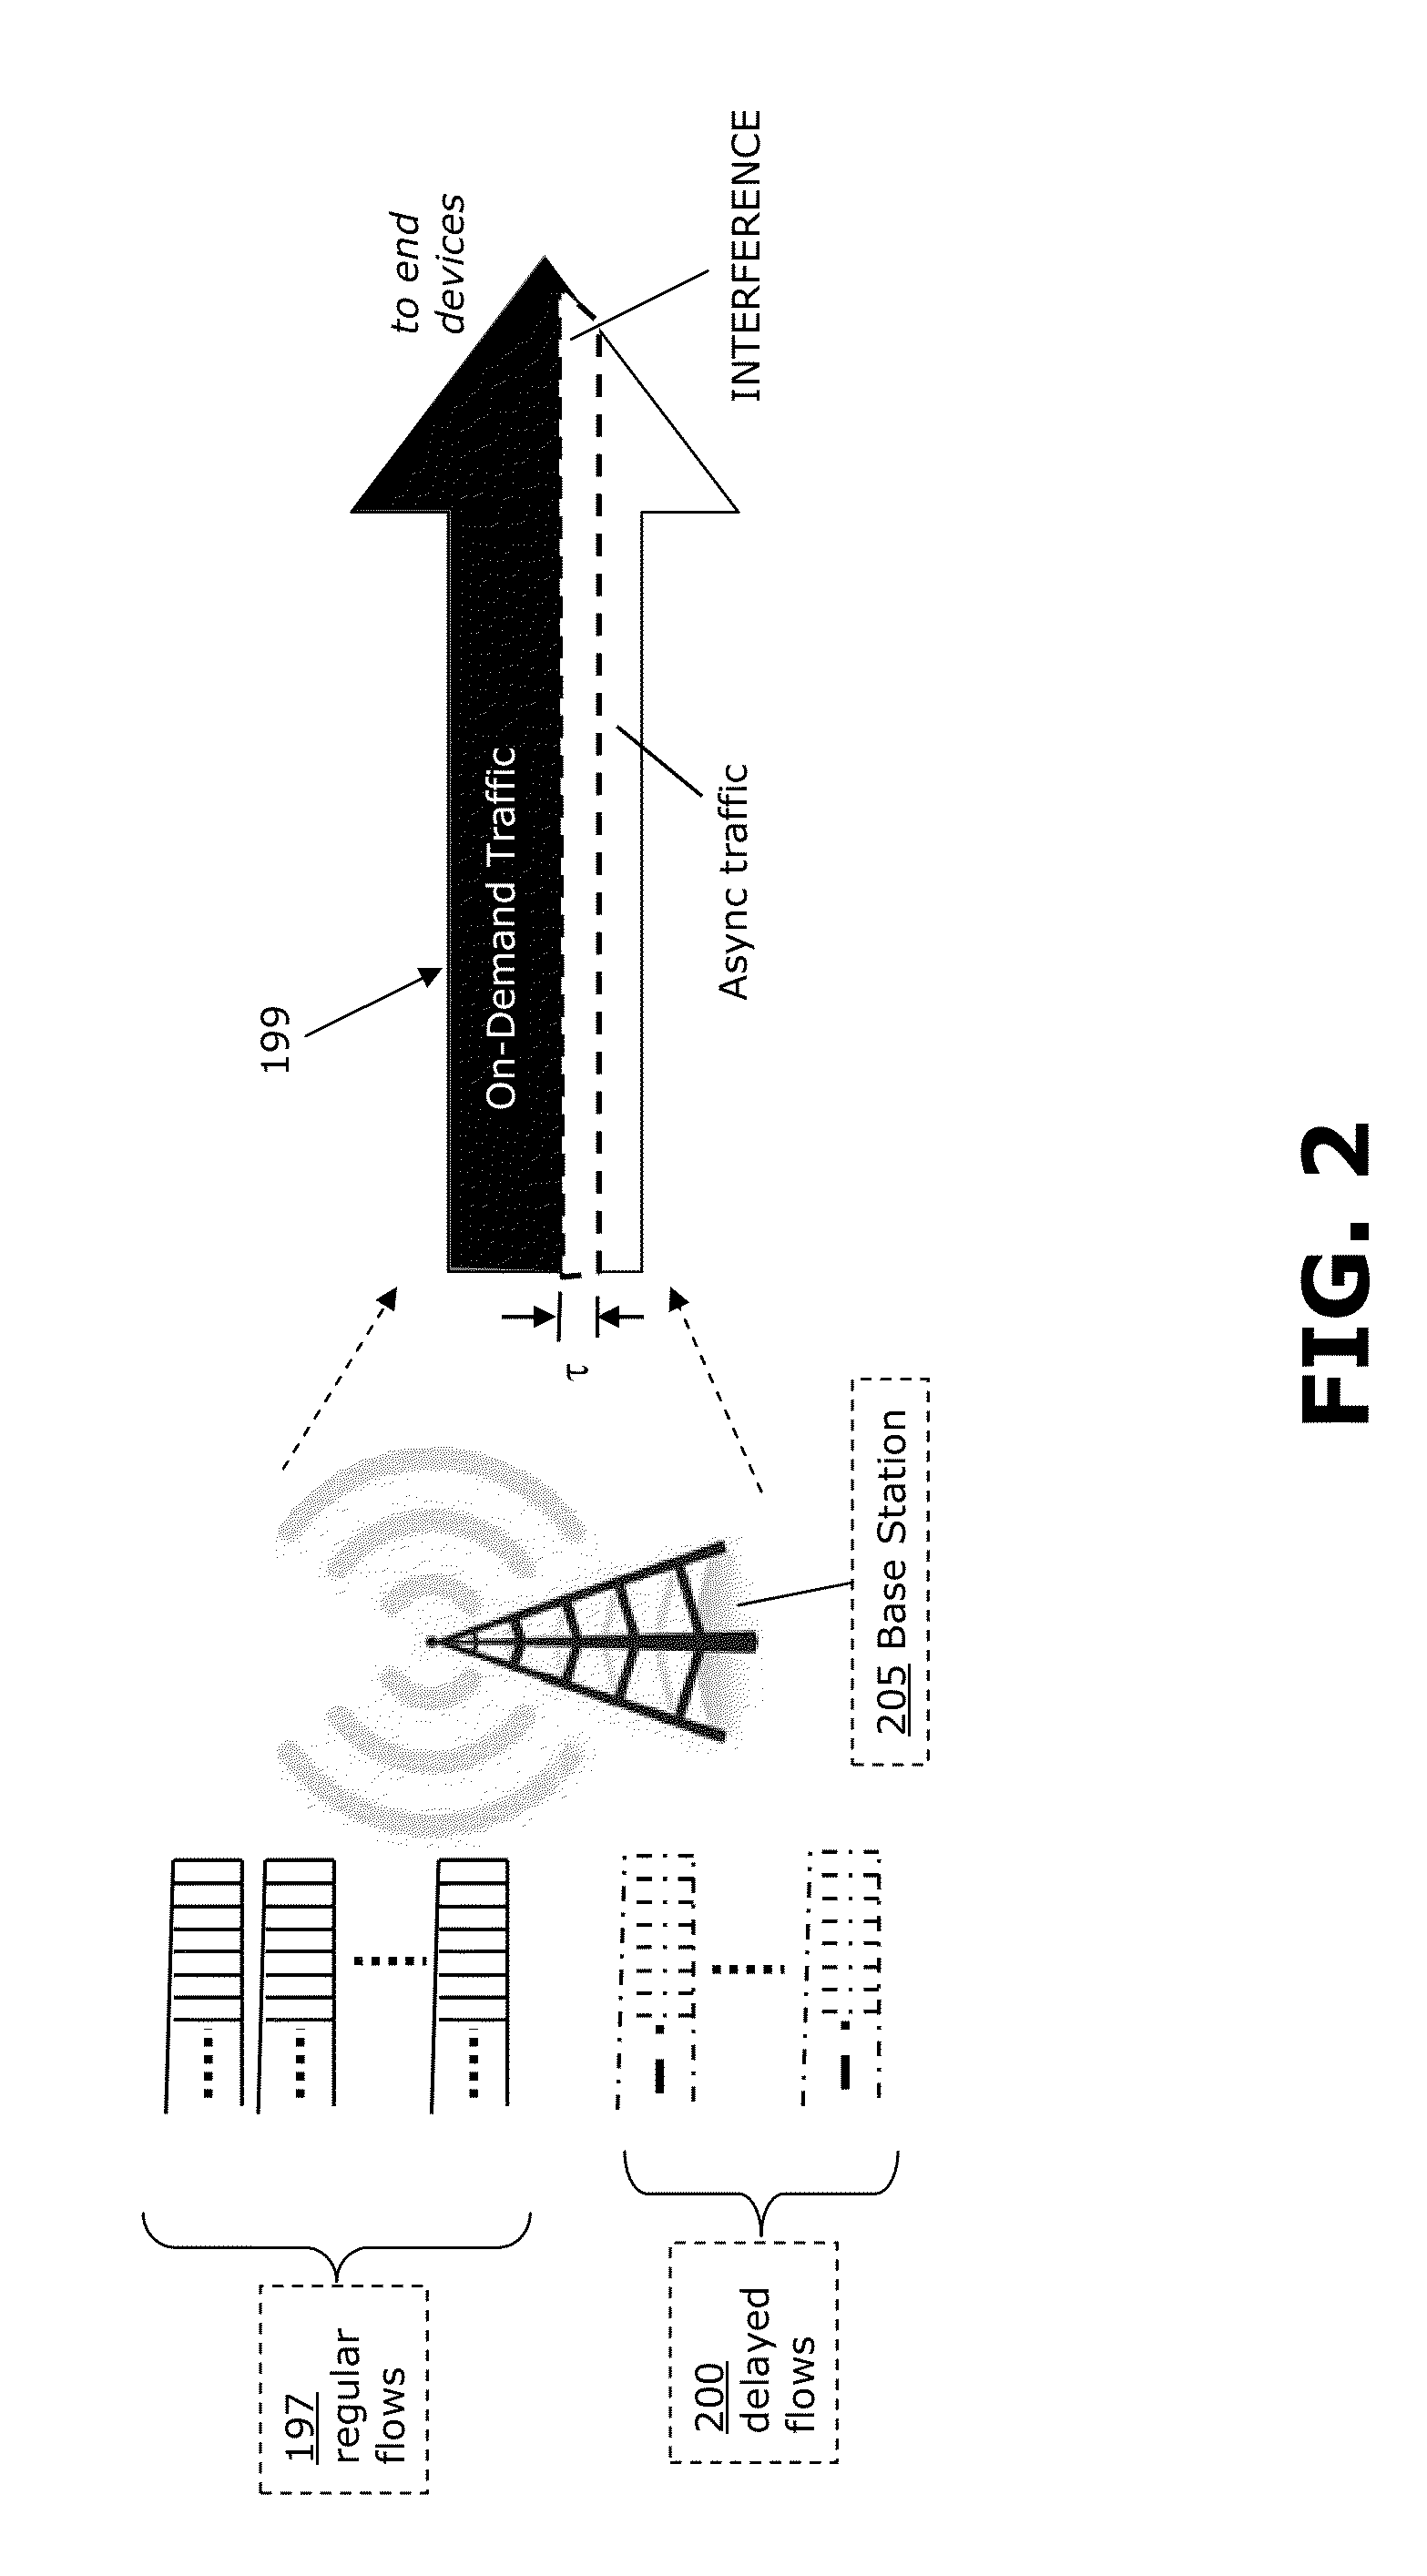 Delayed delivery with bounded interference in a cellular data network